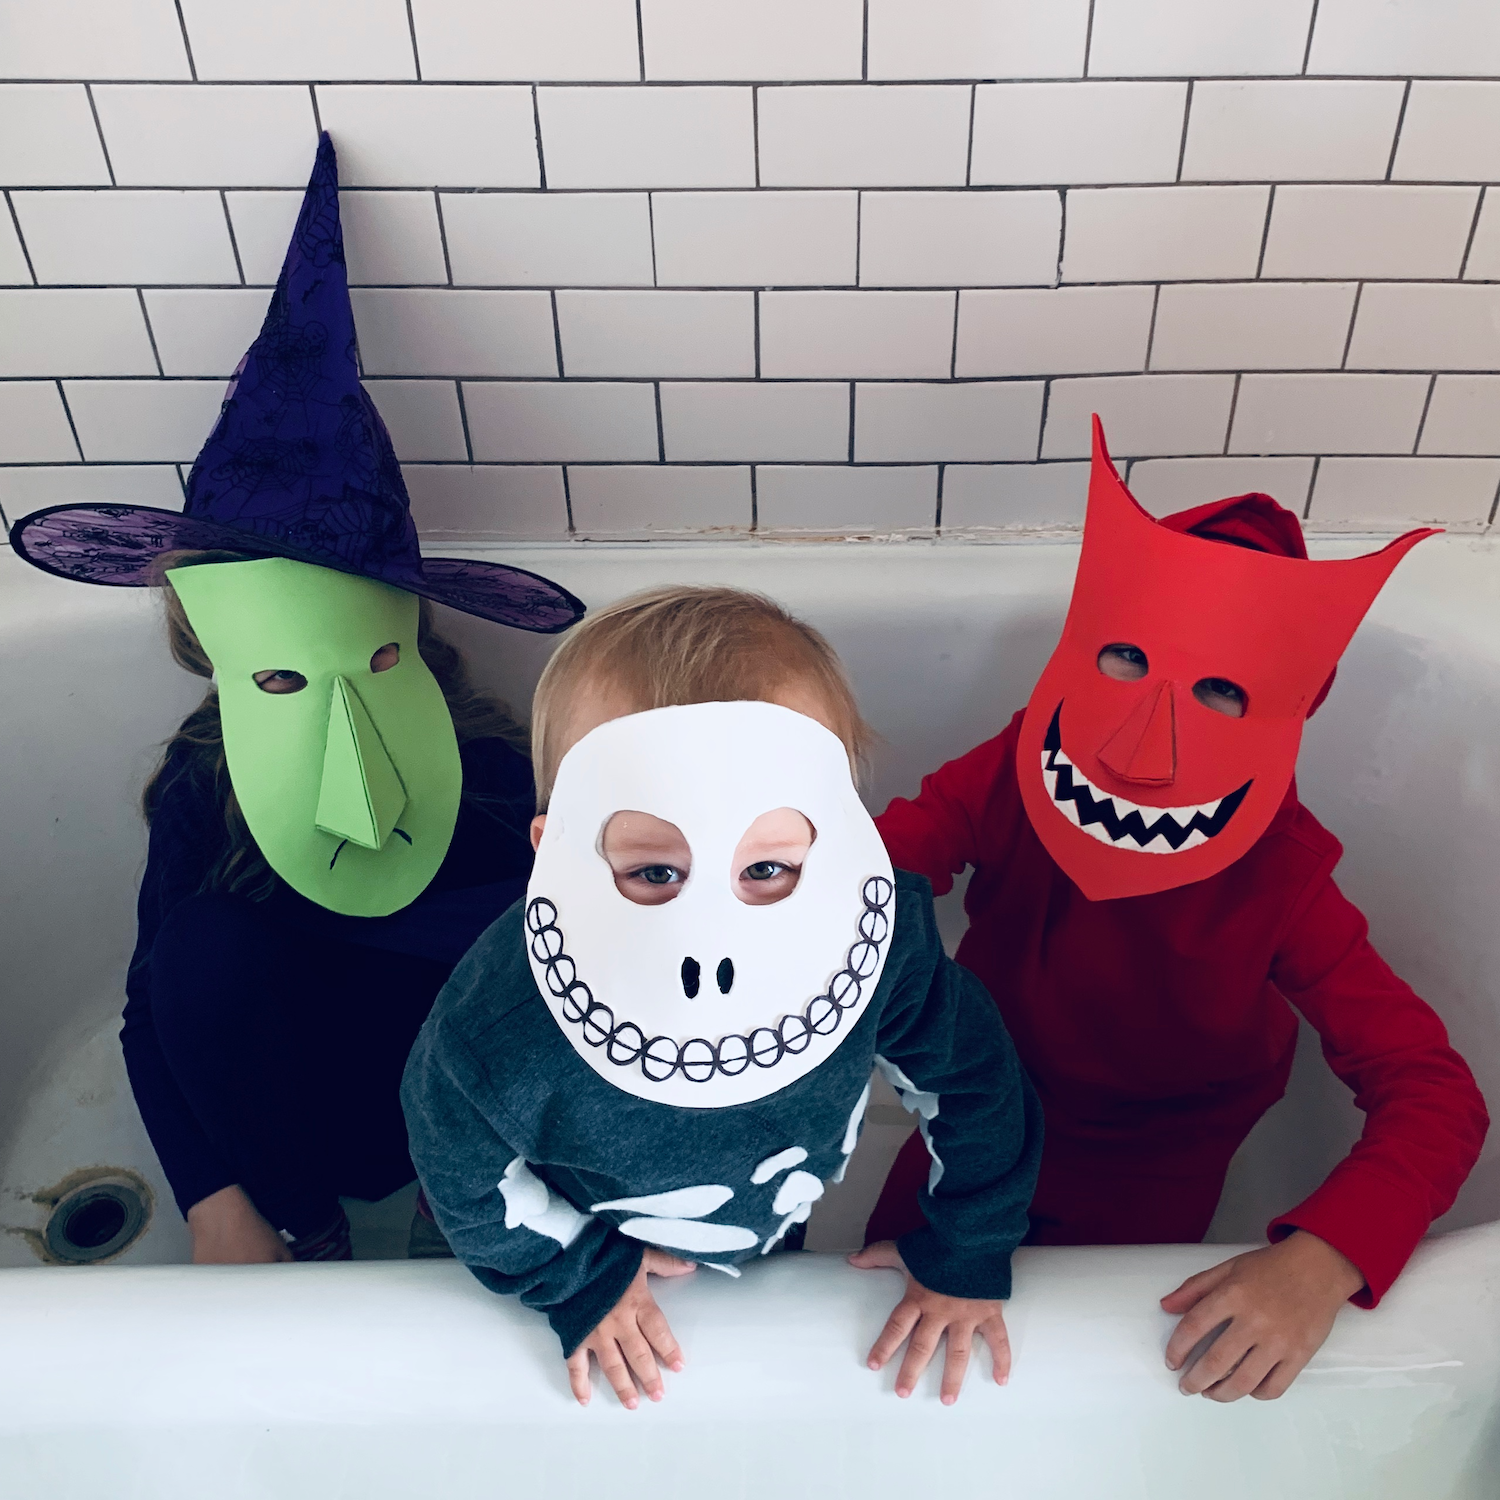 Lock, Shock & Barrel (from the Nightmare Before Christmas): three children, one wearing a purple outfit, another wearing a gray outfit and the third wearing a red outfit; all with masks inspired by the Nightmare Before Christmas.